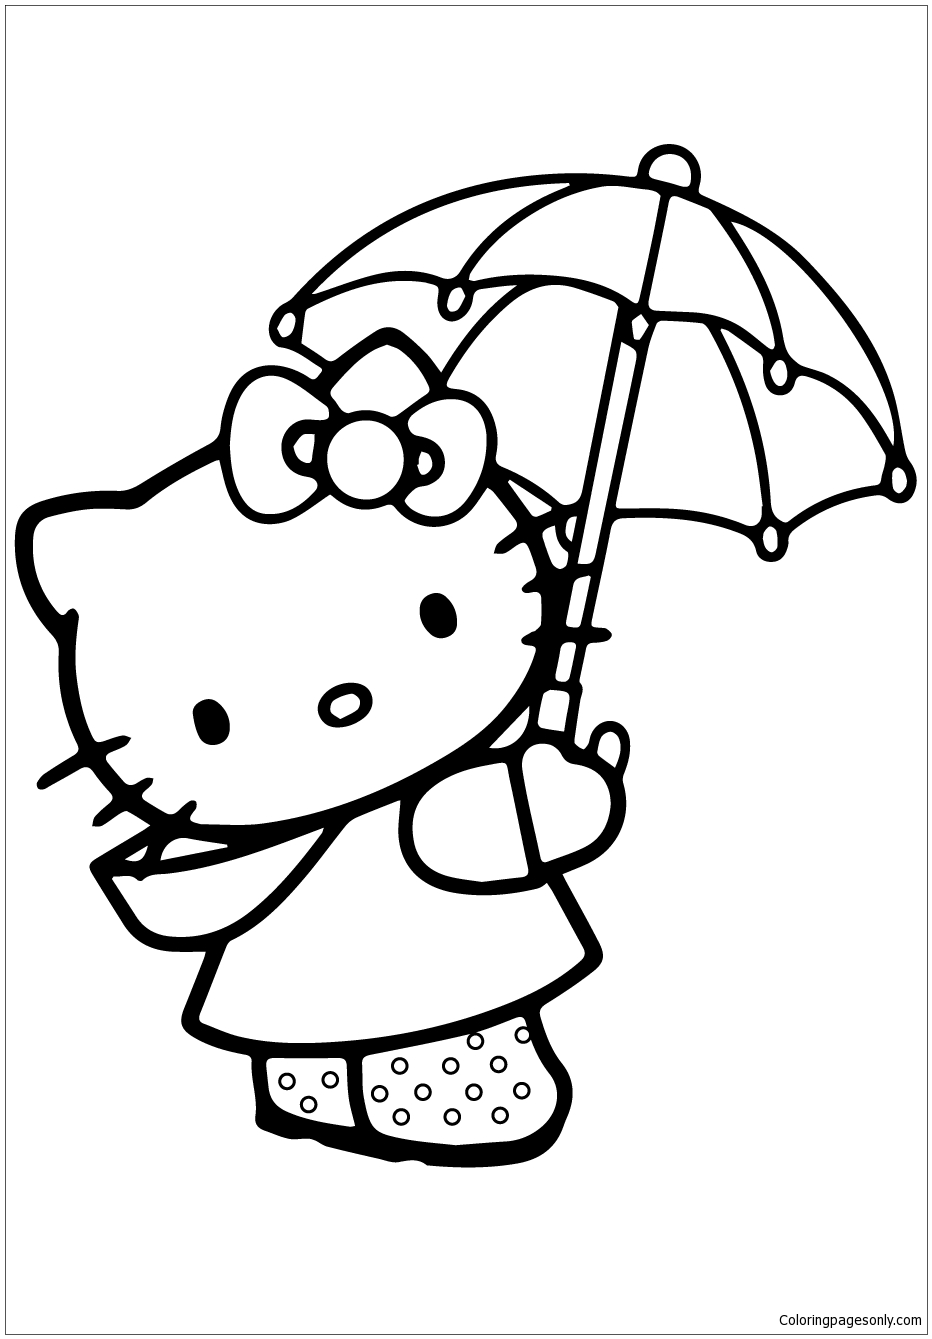 Hello Kitty Under The Umbrella Coloring Page